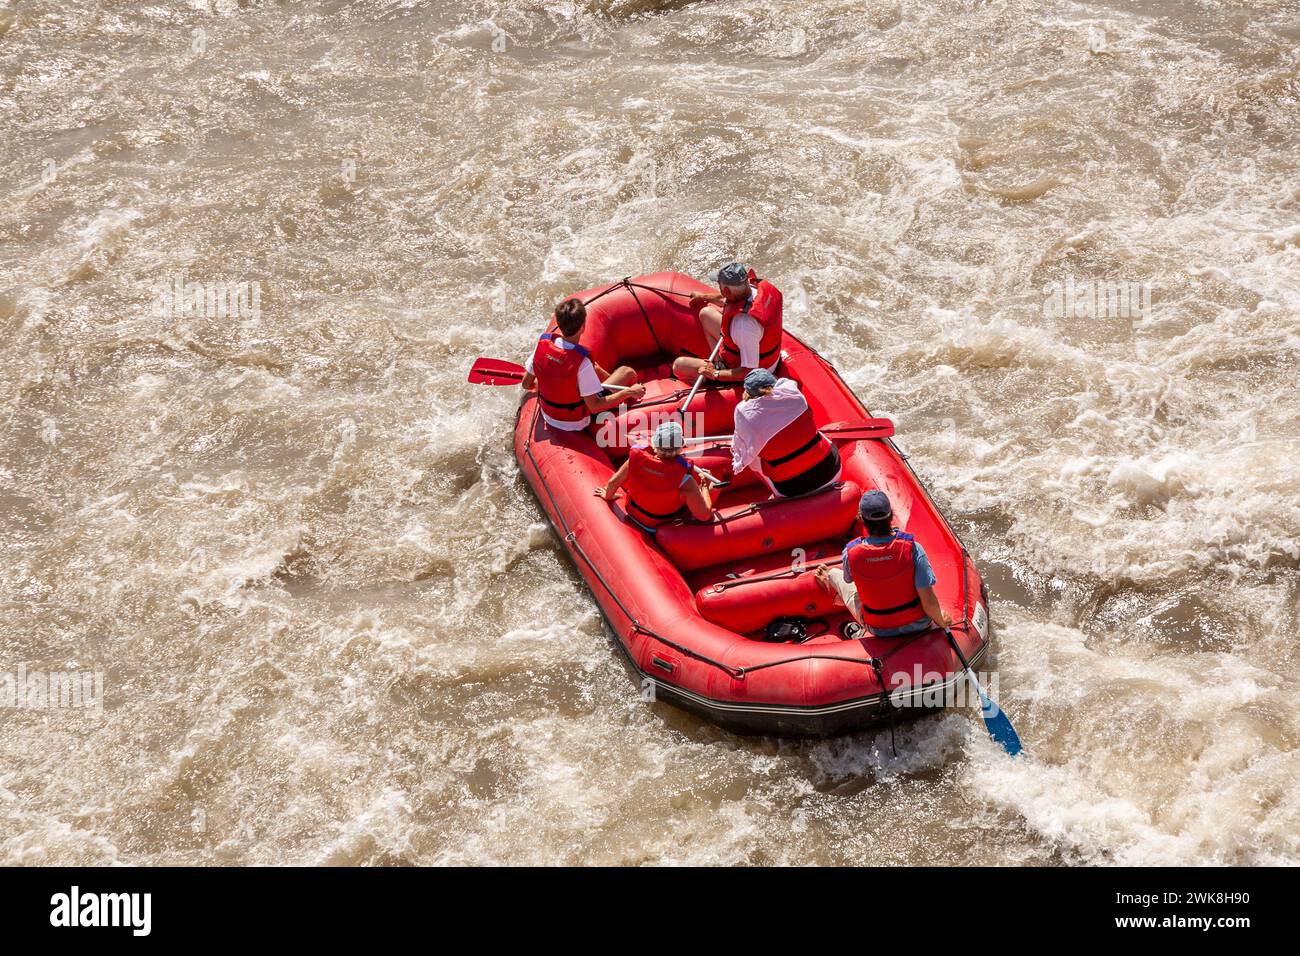 Verona, Italy - August 5, 2009: people rafting at rriver Etsch in Verona, Italy. Stock Photo